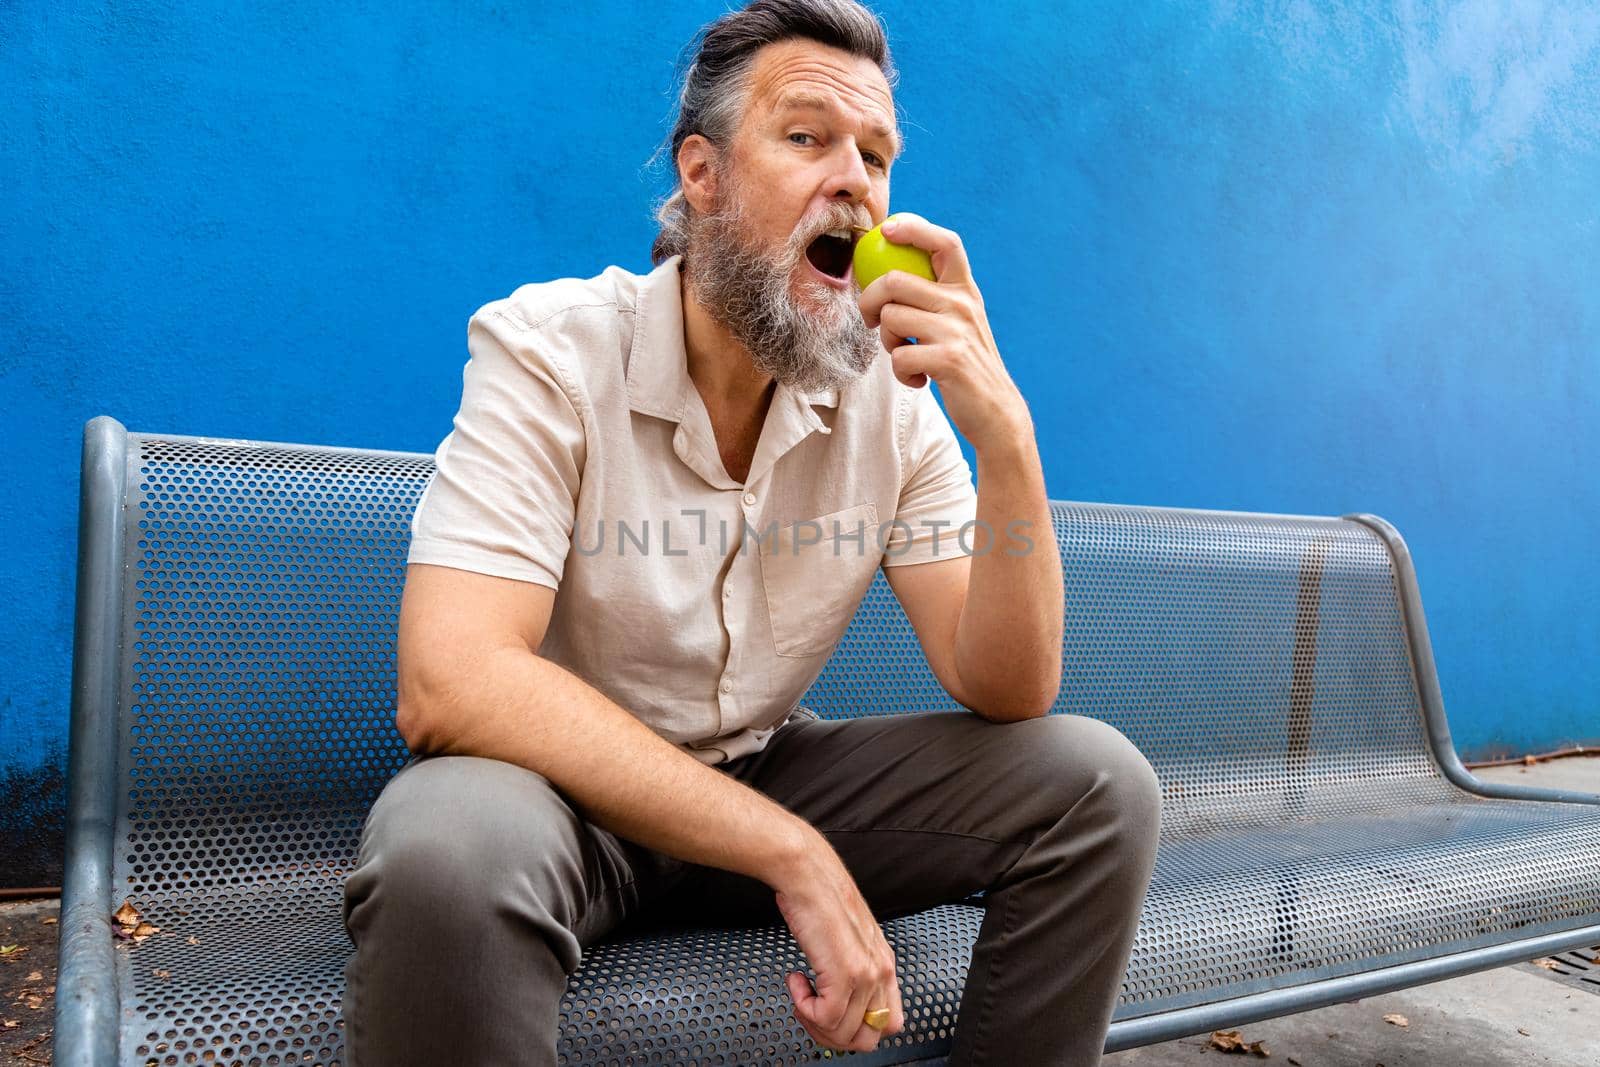 Mature man with beard eating apple outdoors looking at camera. blue background. by Hoverstock